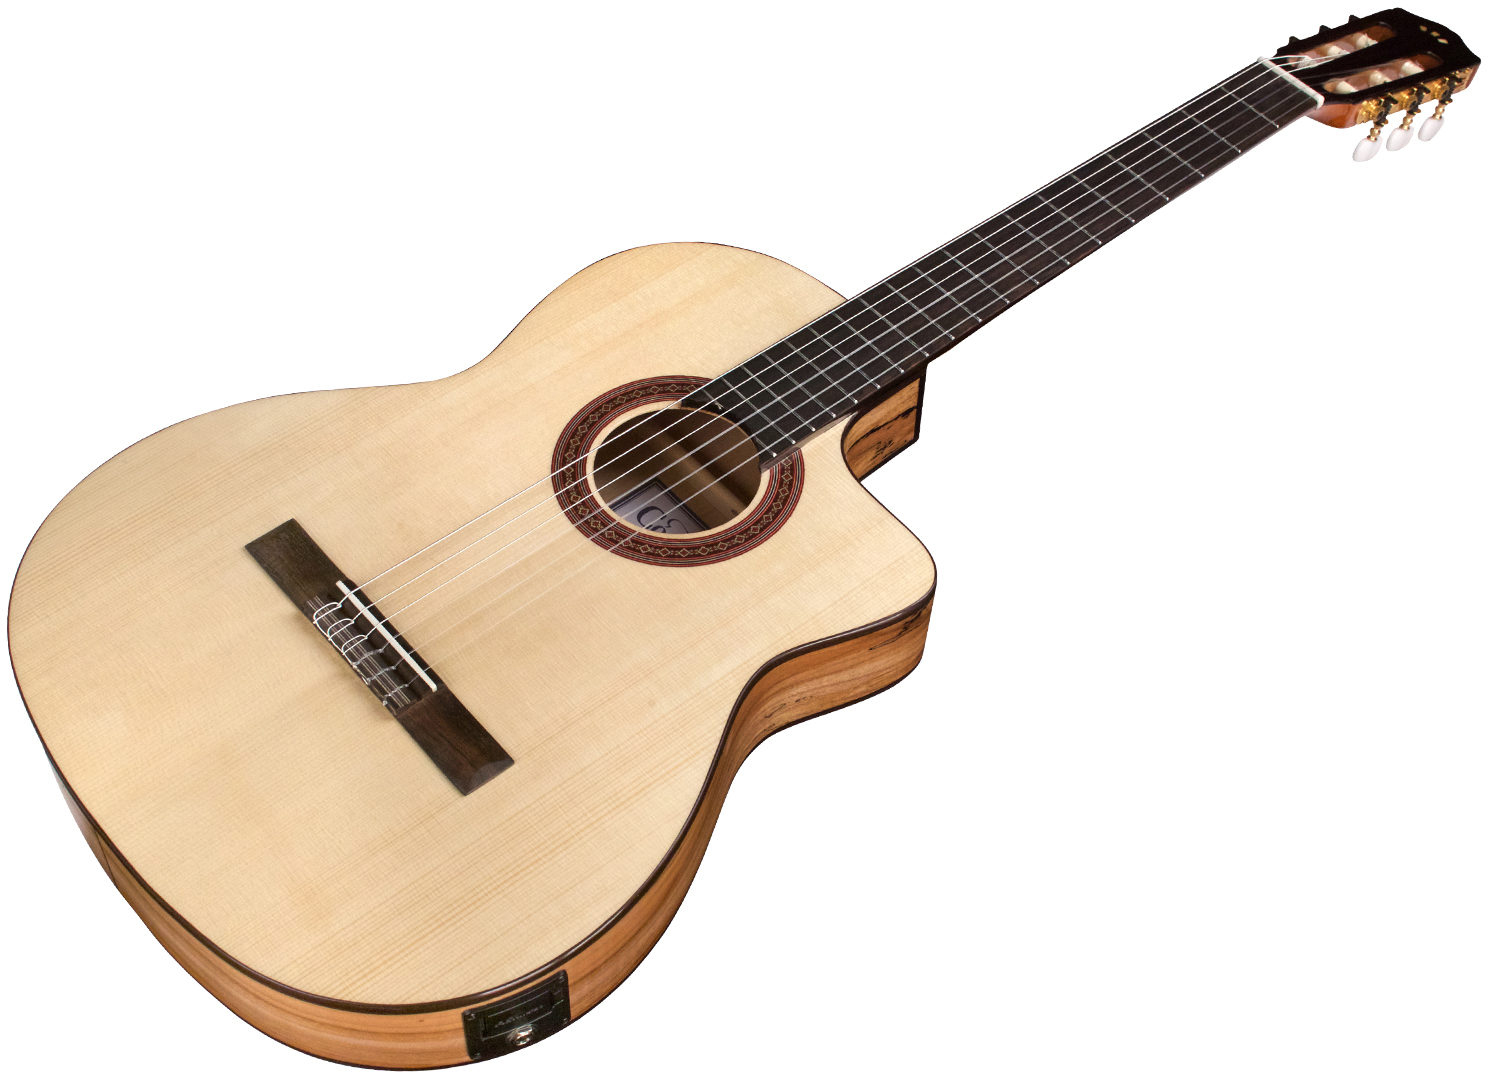 Cordoba C5 Cet Spalted Maple Limited Thinbody Cw Epicea Erable Pf - Natural - Guitarra clásica 4/4 - Variation 2